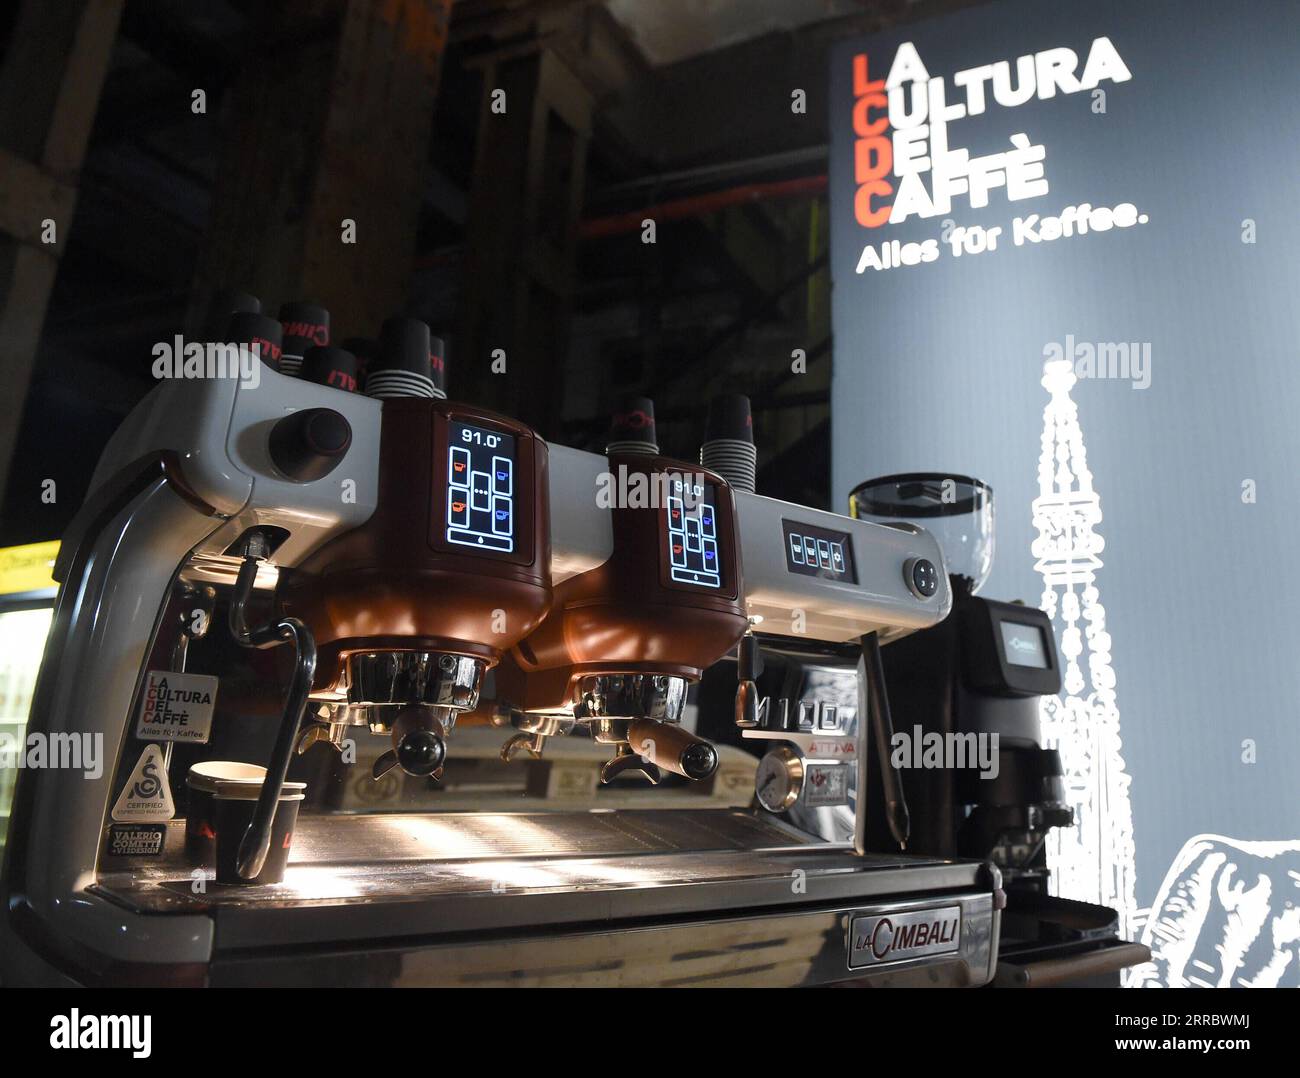 211008 -- VIENNA, Oct. 8, 2021 -- Coffee machines are exhibited at the 2021 Vienna Coffee Festival in Vienna, Austria, on Oct. 8, 2021. The 2021 Vienna Coffee Festival is held here in the Ottakringer Brewery from Oct. 8 to Oct. 10, attracting over 60 exhibitors from all over the world.  AUSTRIA-VIENNA-COFFEE FESTIVAL GuoxChen PUBLICATIONxNOTxINxCHN Stock Photo